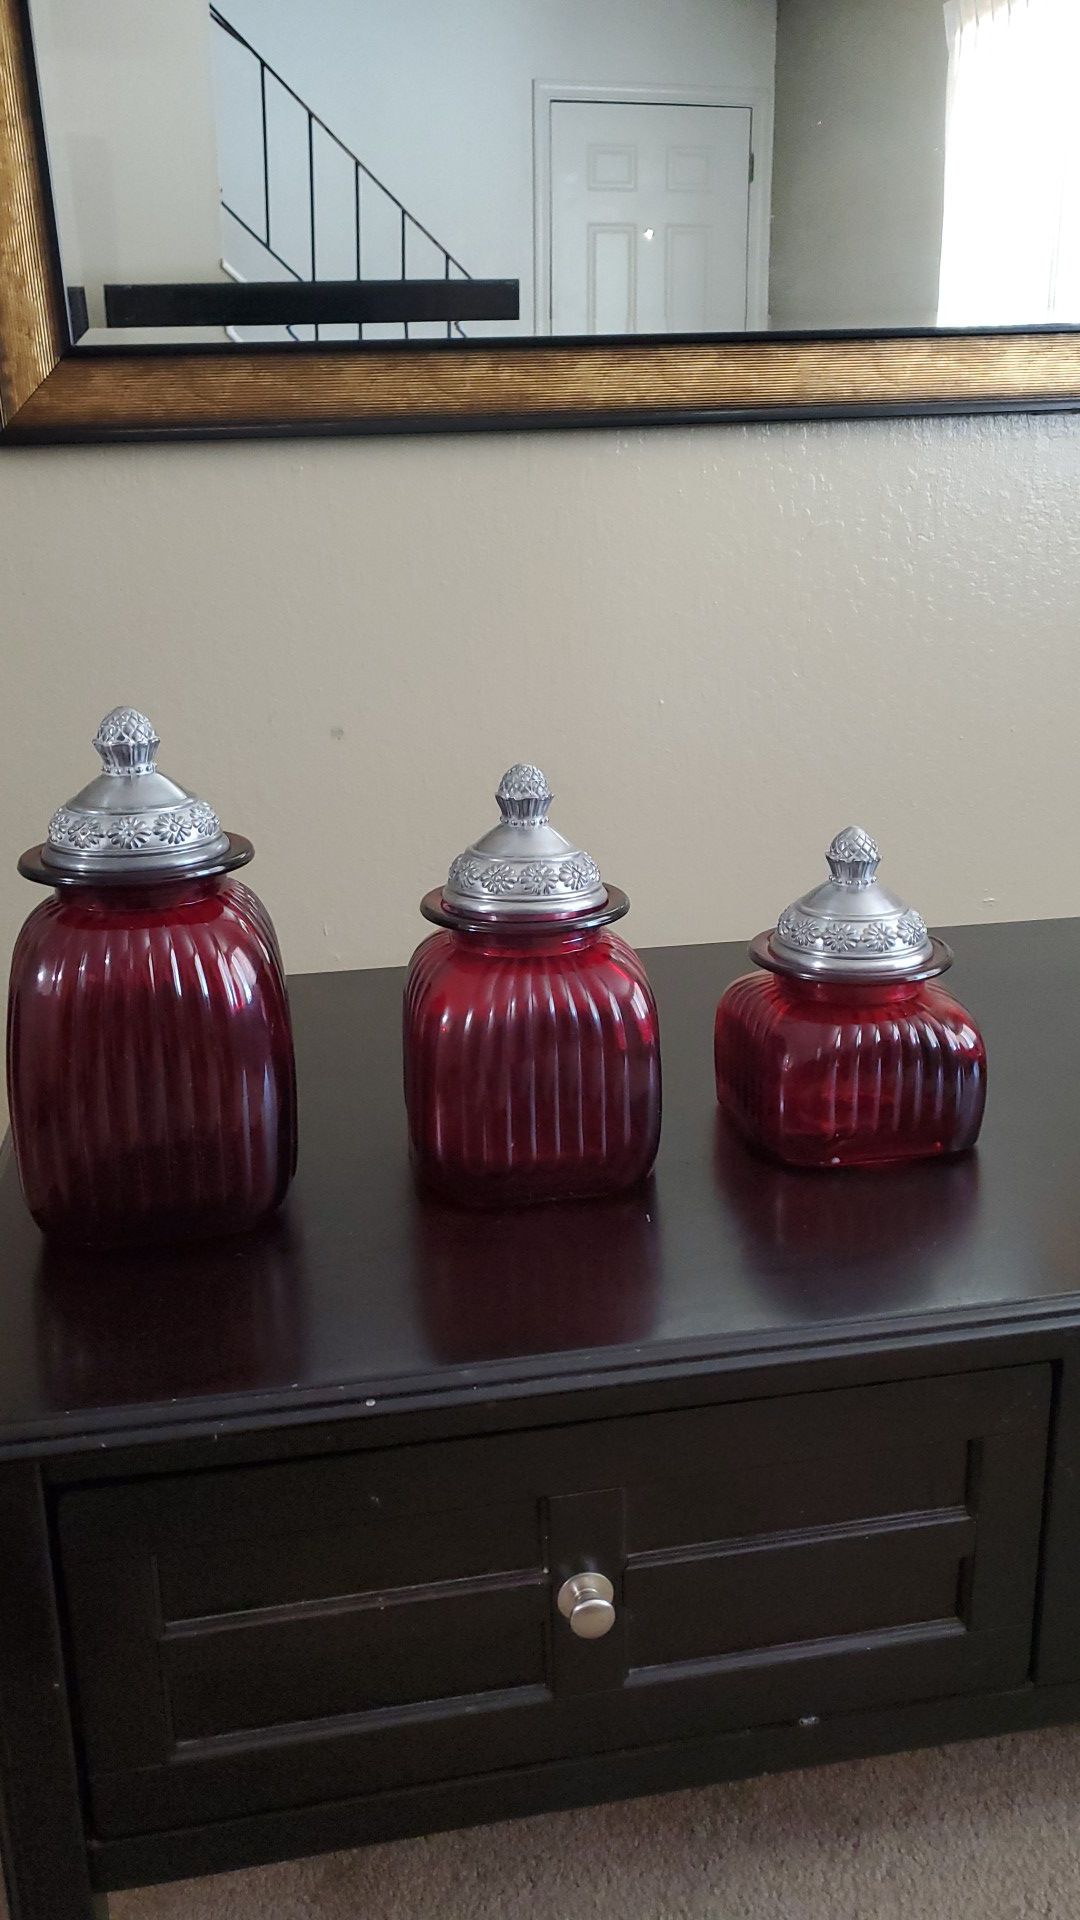 Three Red Stained glass storage containers